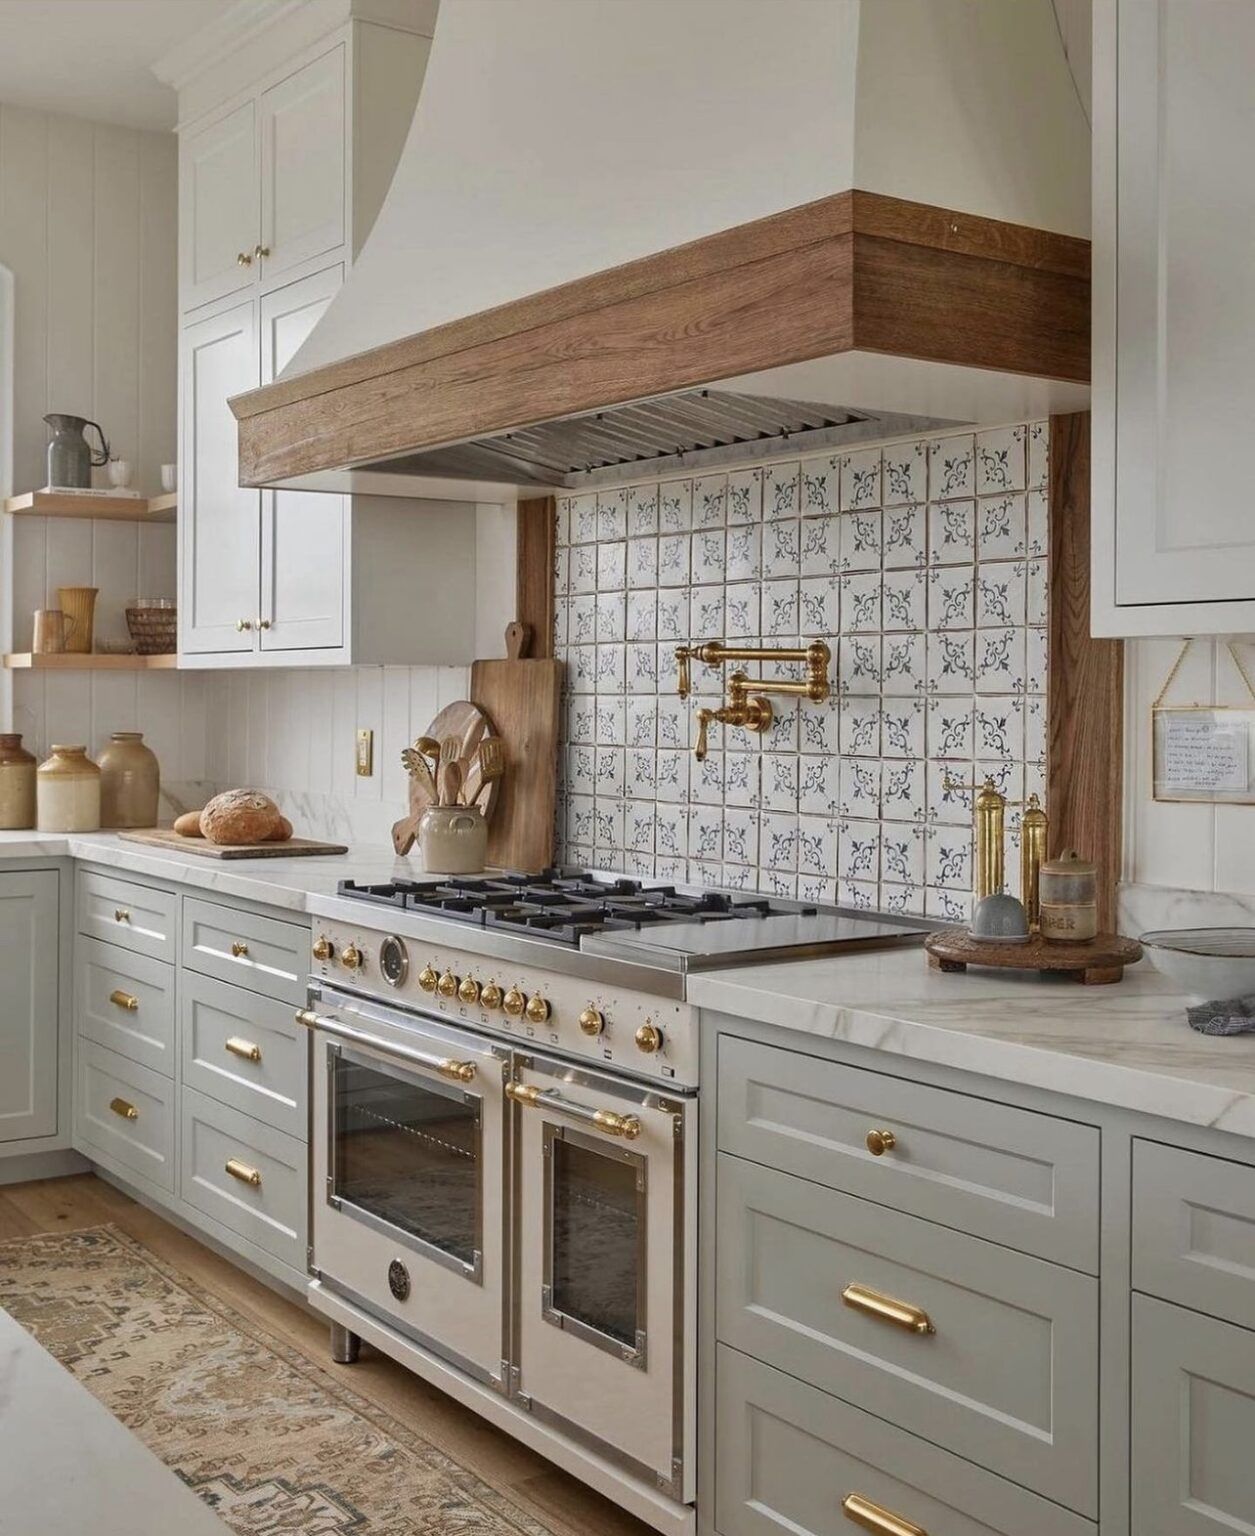 Kitchen Cabinets: Organize Your Space with Stylish and Functional Kitchen Cabinets